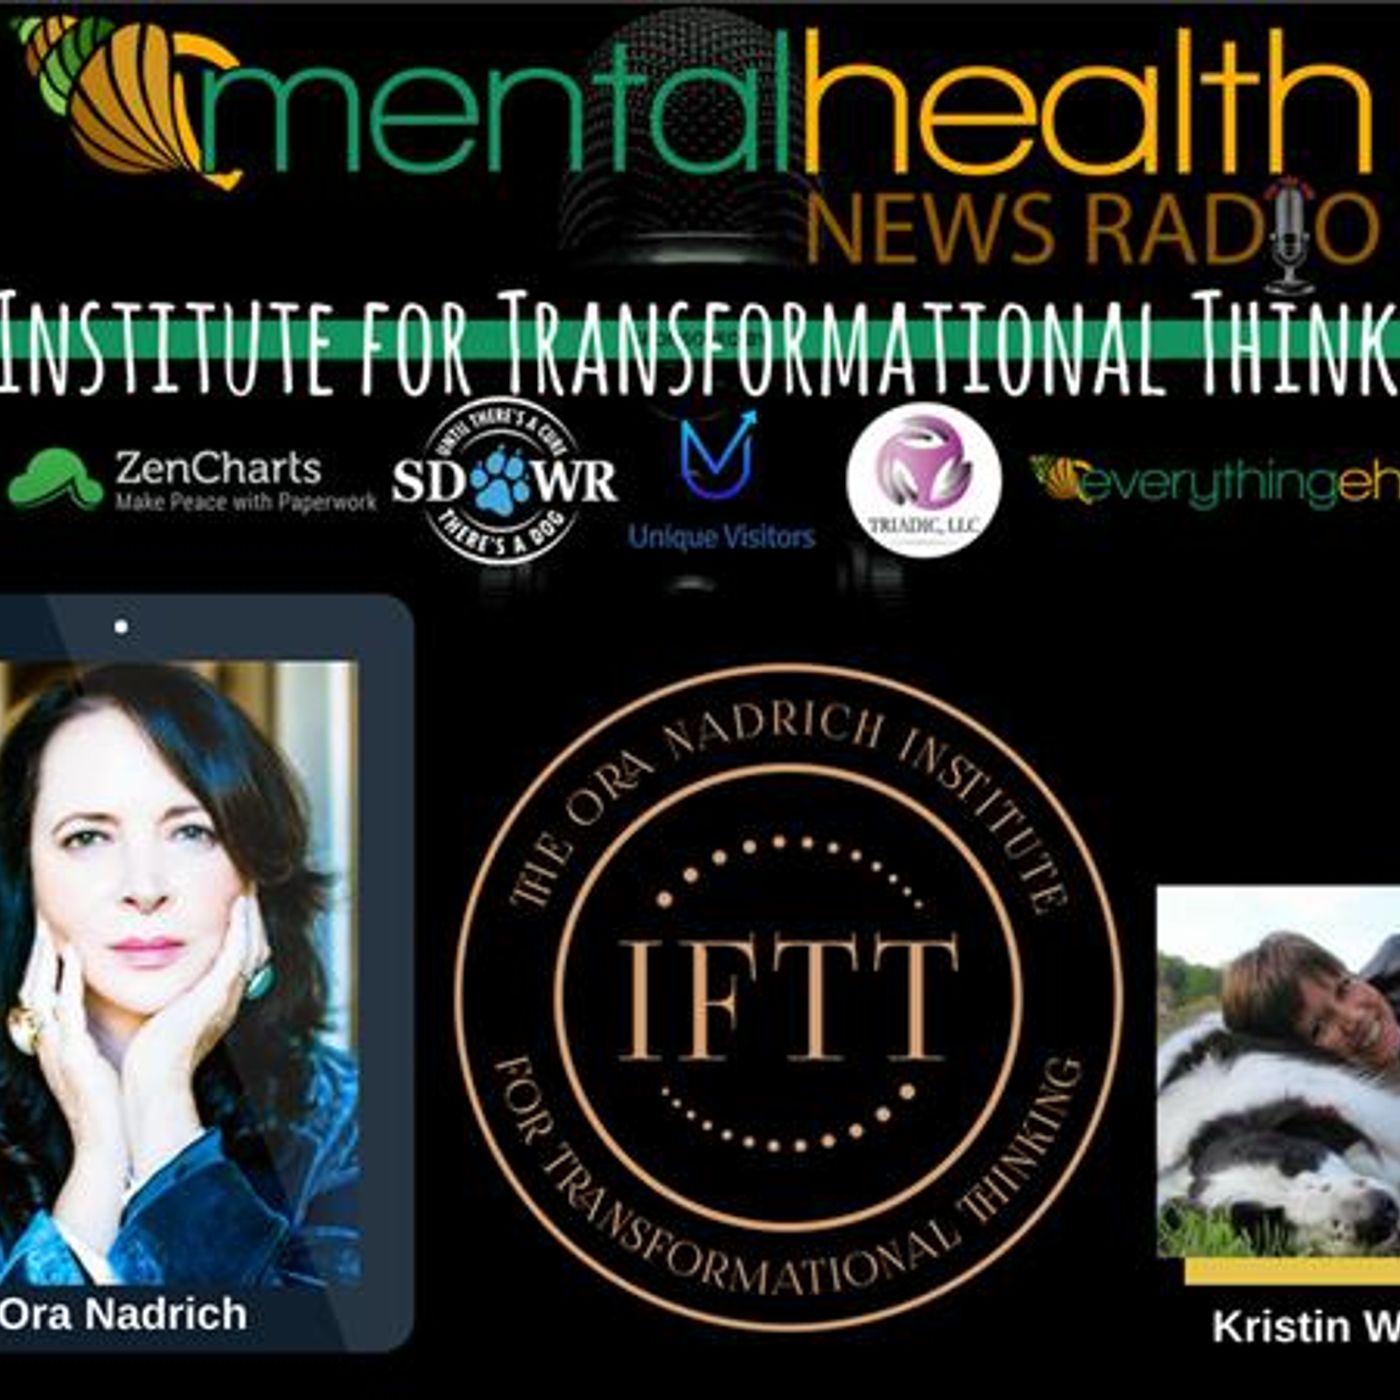 Mental Health News Radio - The Institute for Transformational Thinking with Ora Nadrich